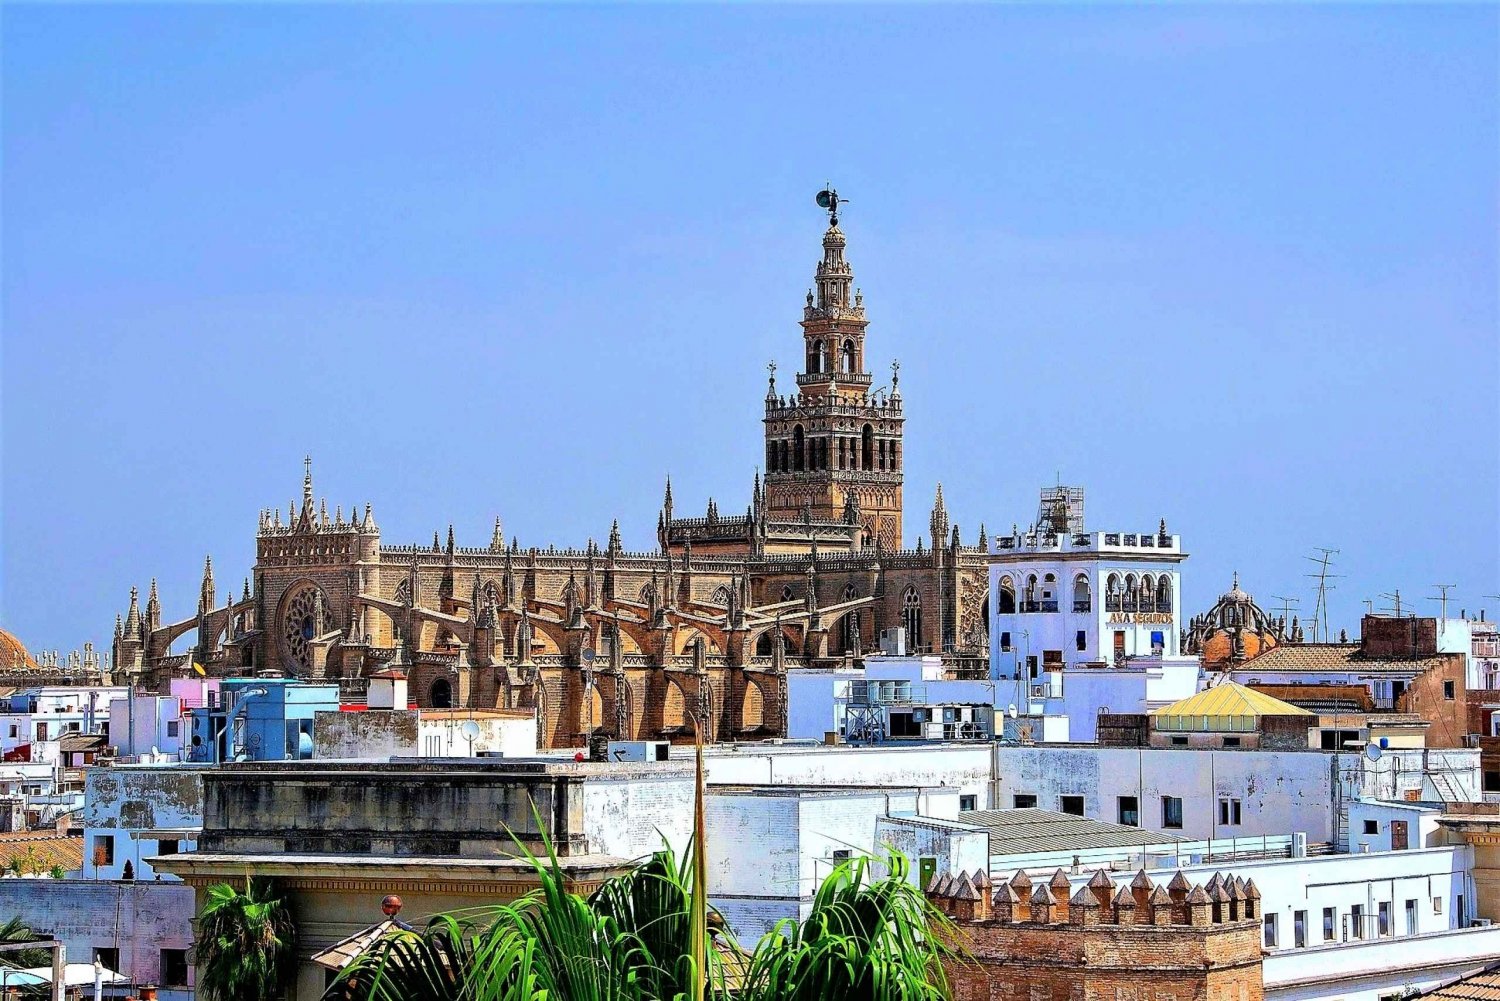 From Costa del Sol: Seville and Royal Alcázar Palace